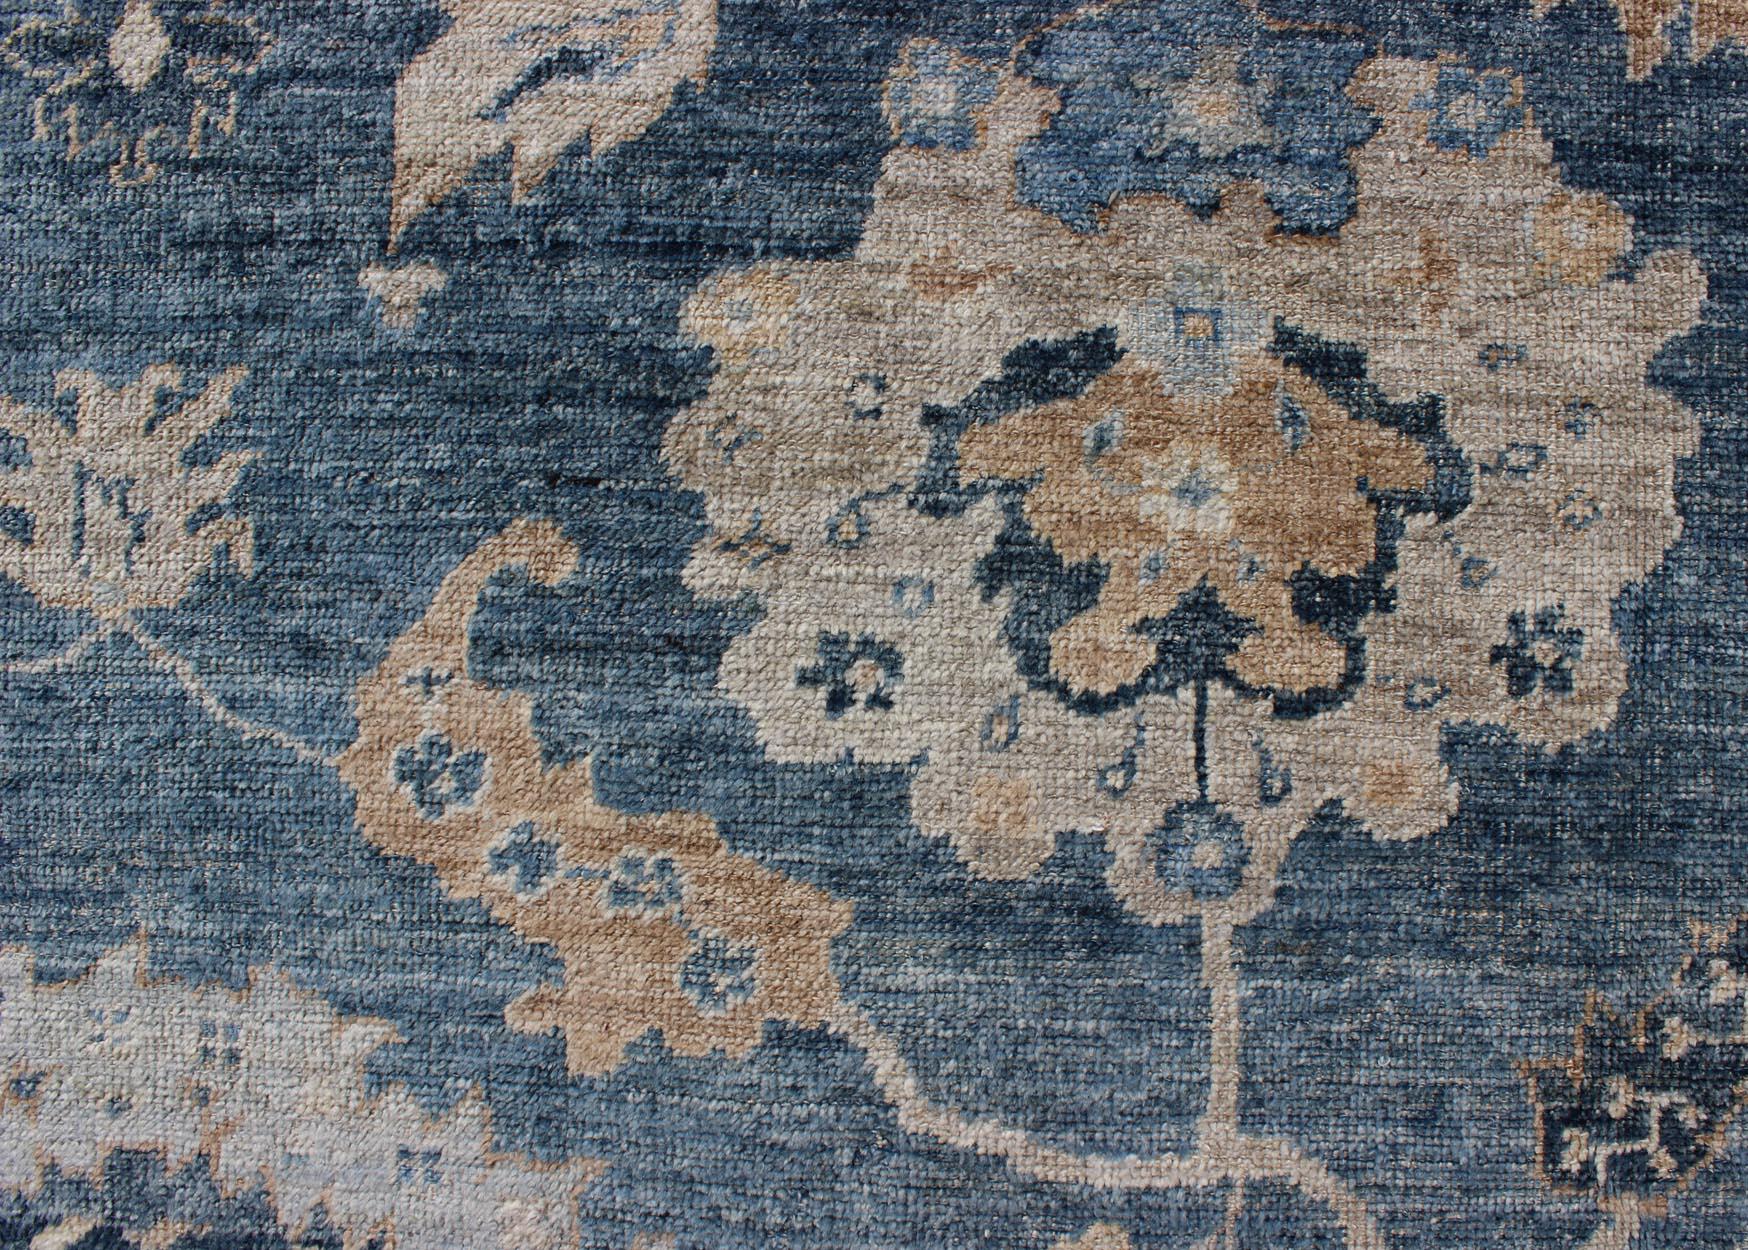 Angora Turkish Oushak Rug in Shades of Blue and Tan 4